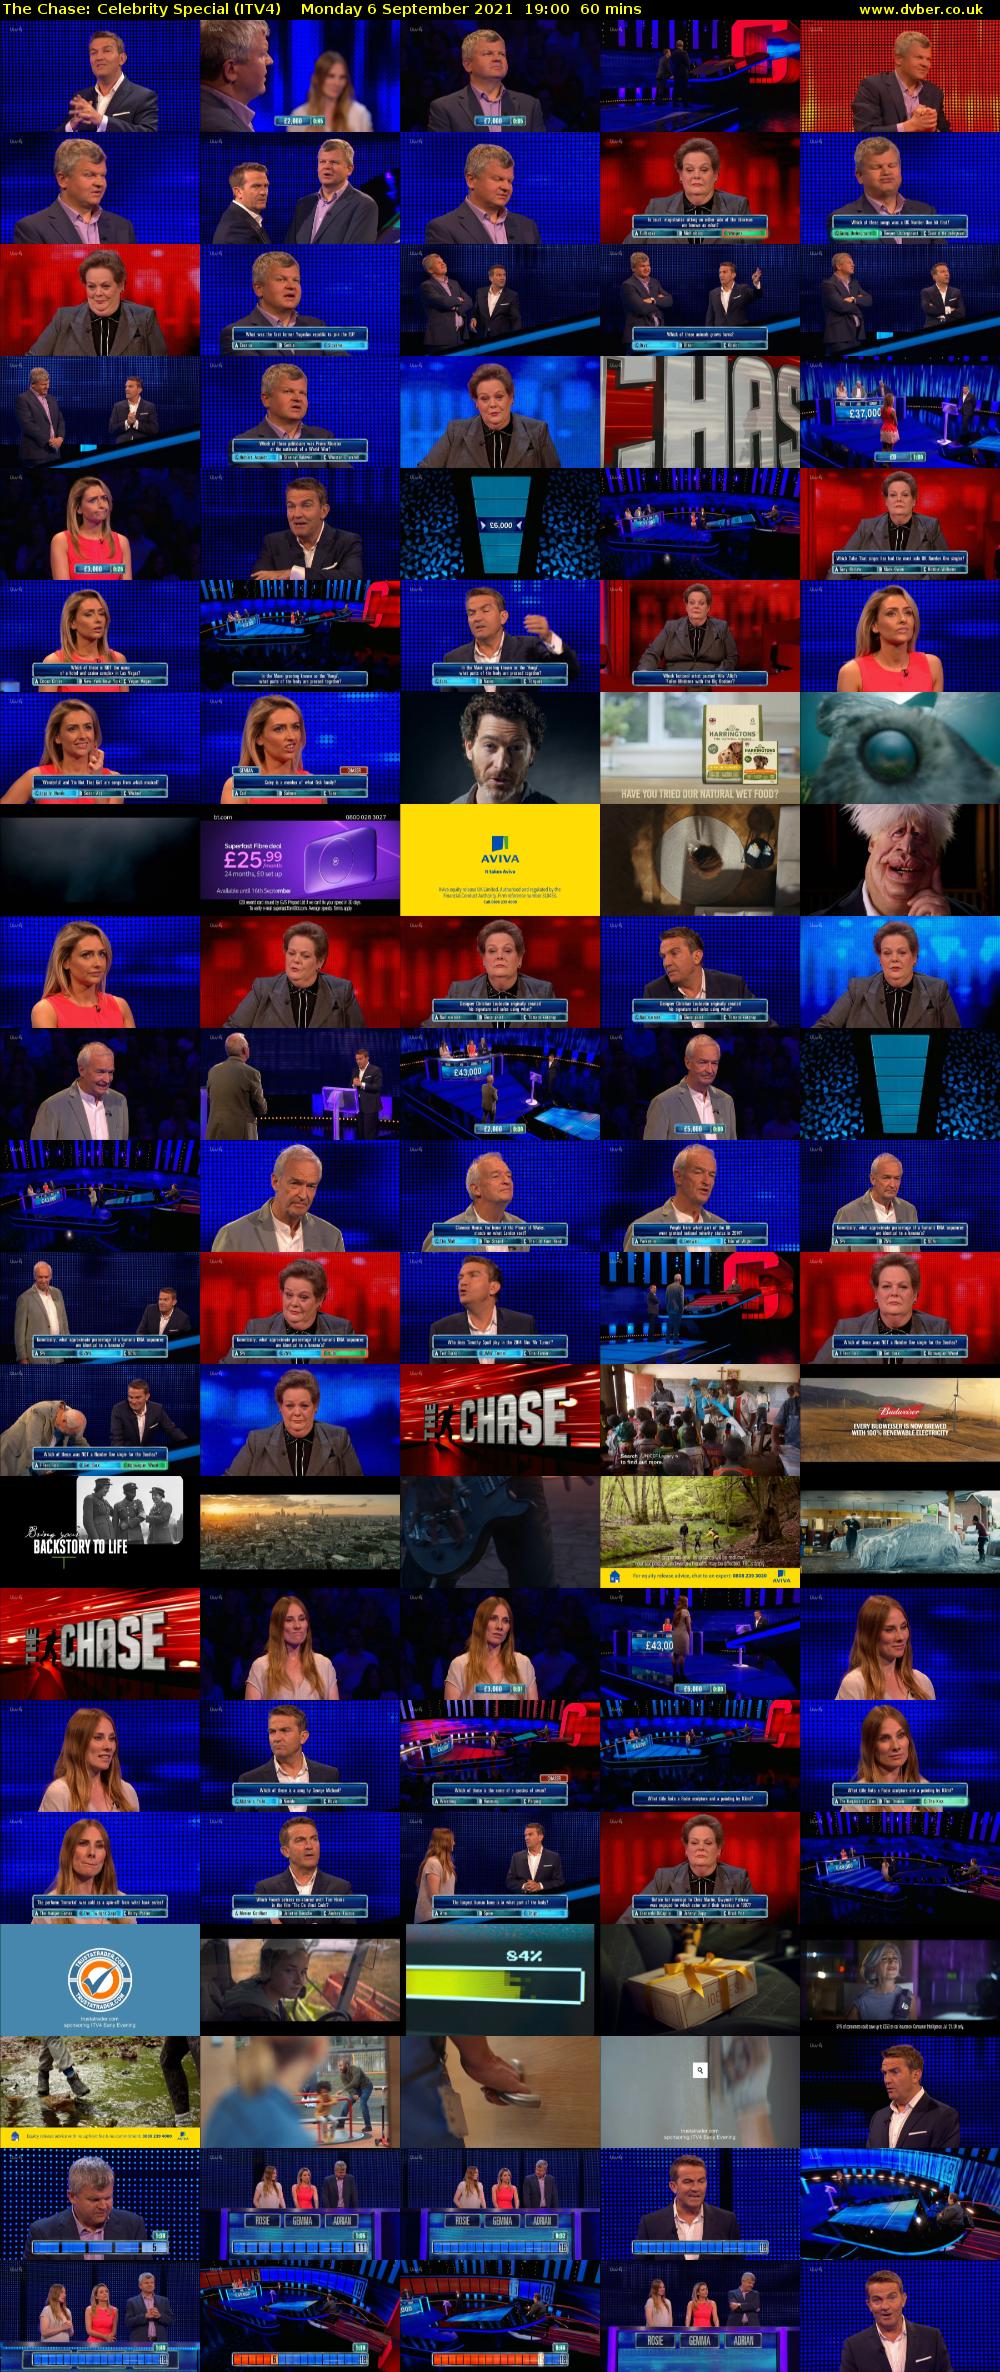 The Chase: Celebrity Special (ITV4) Monday 6 September 2021 19:00 - 20:00